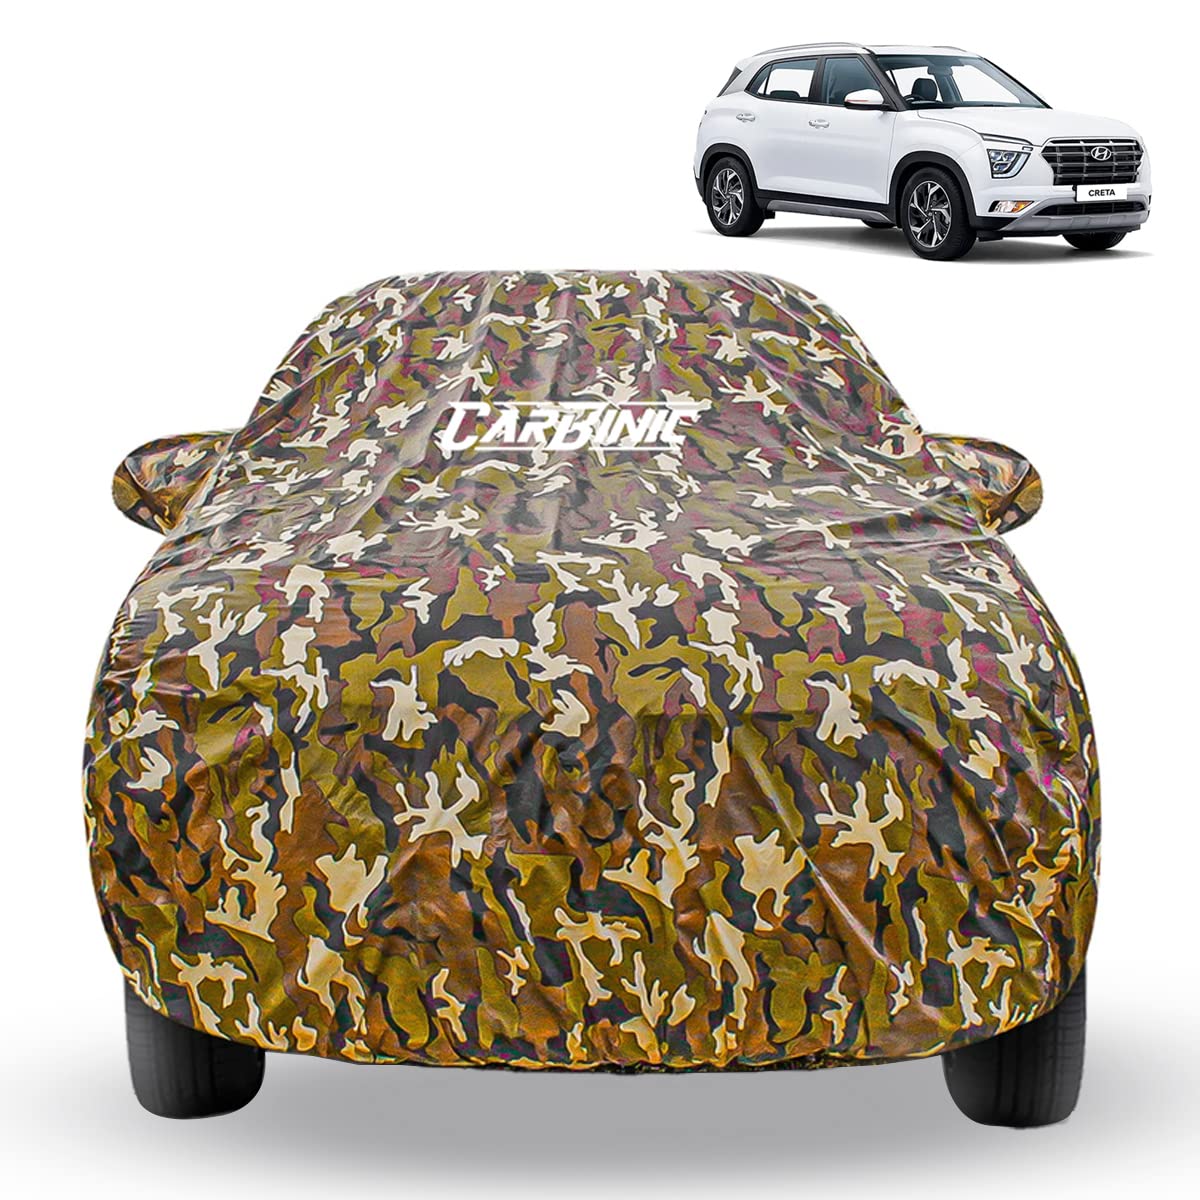 CARBINIC Waterproof Car Body Cover for Hyundai Creta 2022 | Dustproof, UV Proof Car Cover | Creta Car Accessories | Mirror Pockets & Antenna Triple Stitched | Double Layered Soft Cotton Lining, Jungle